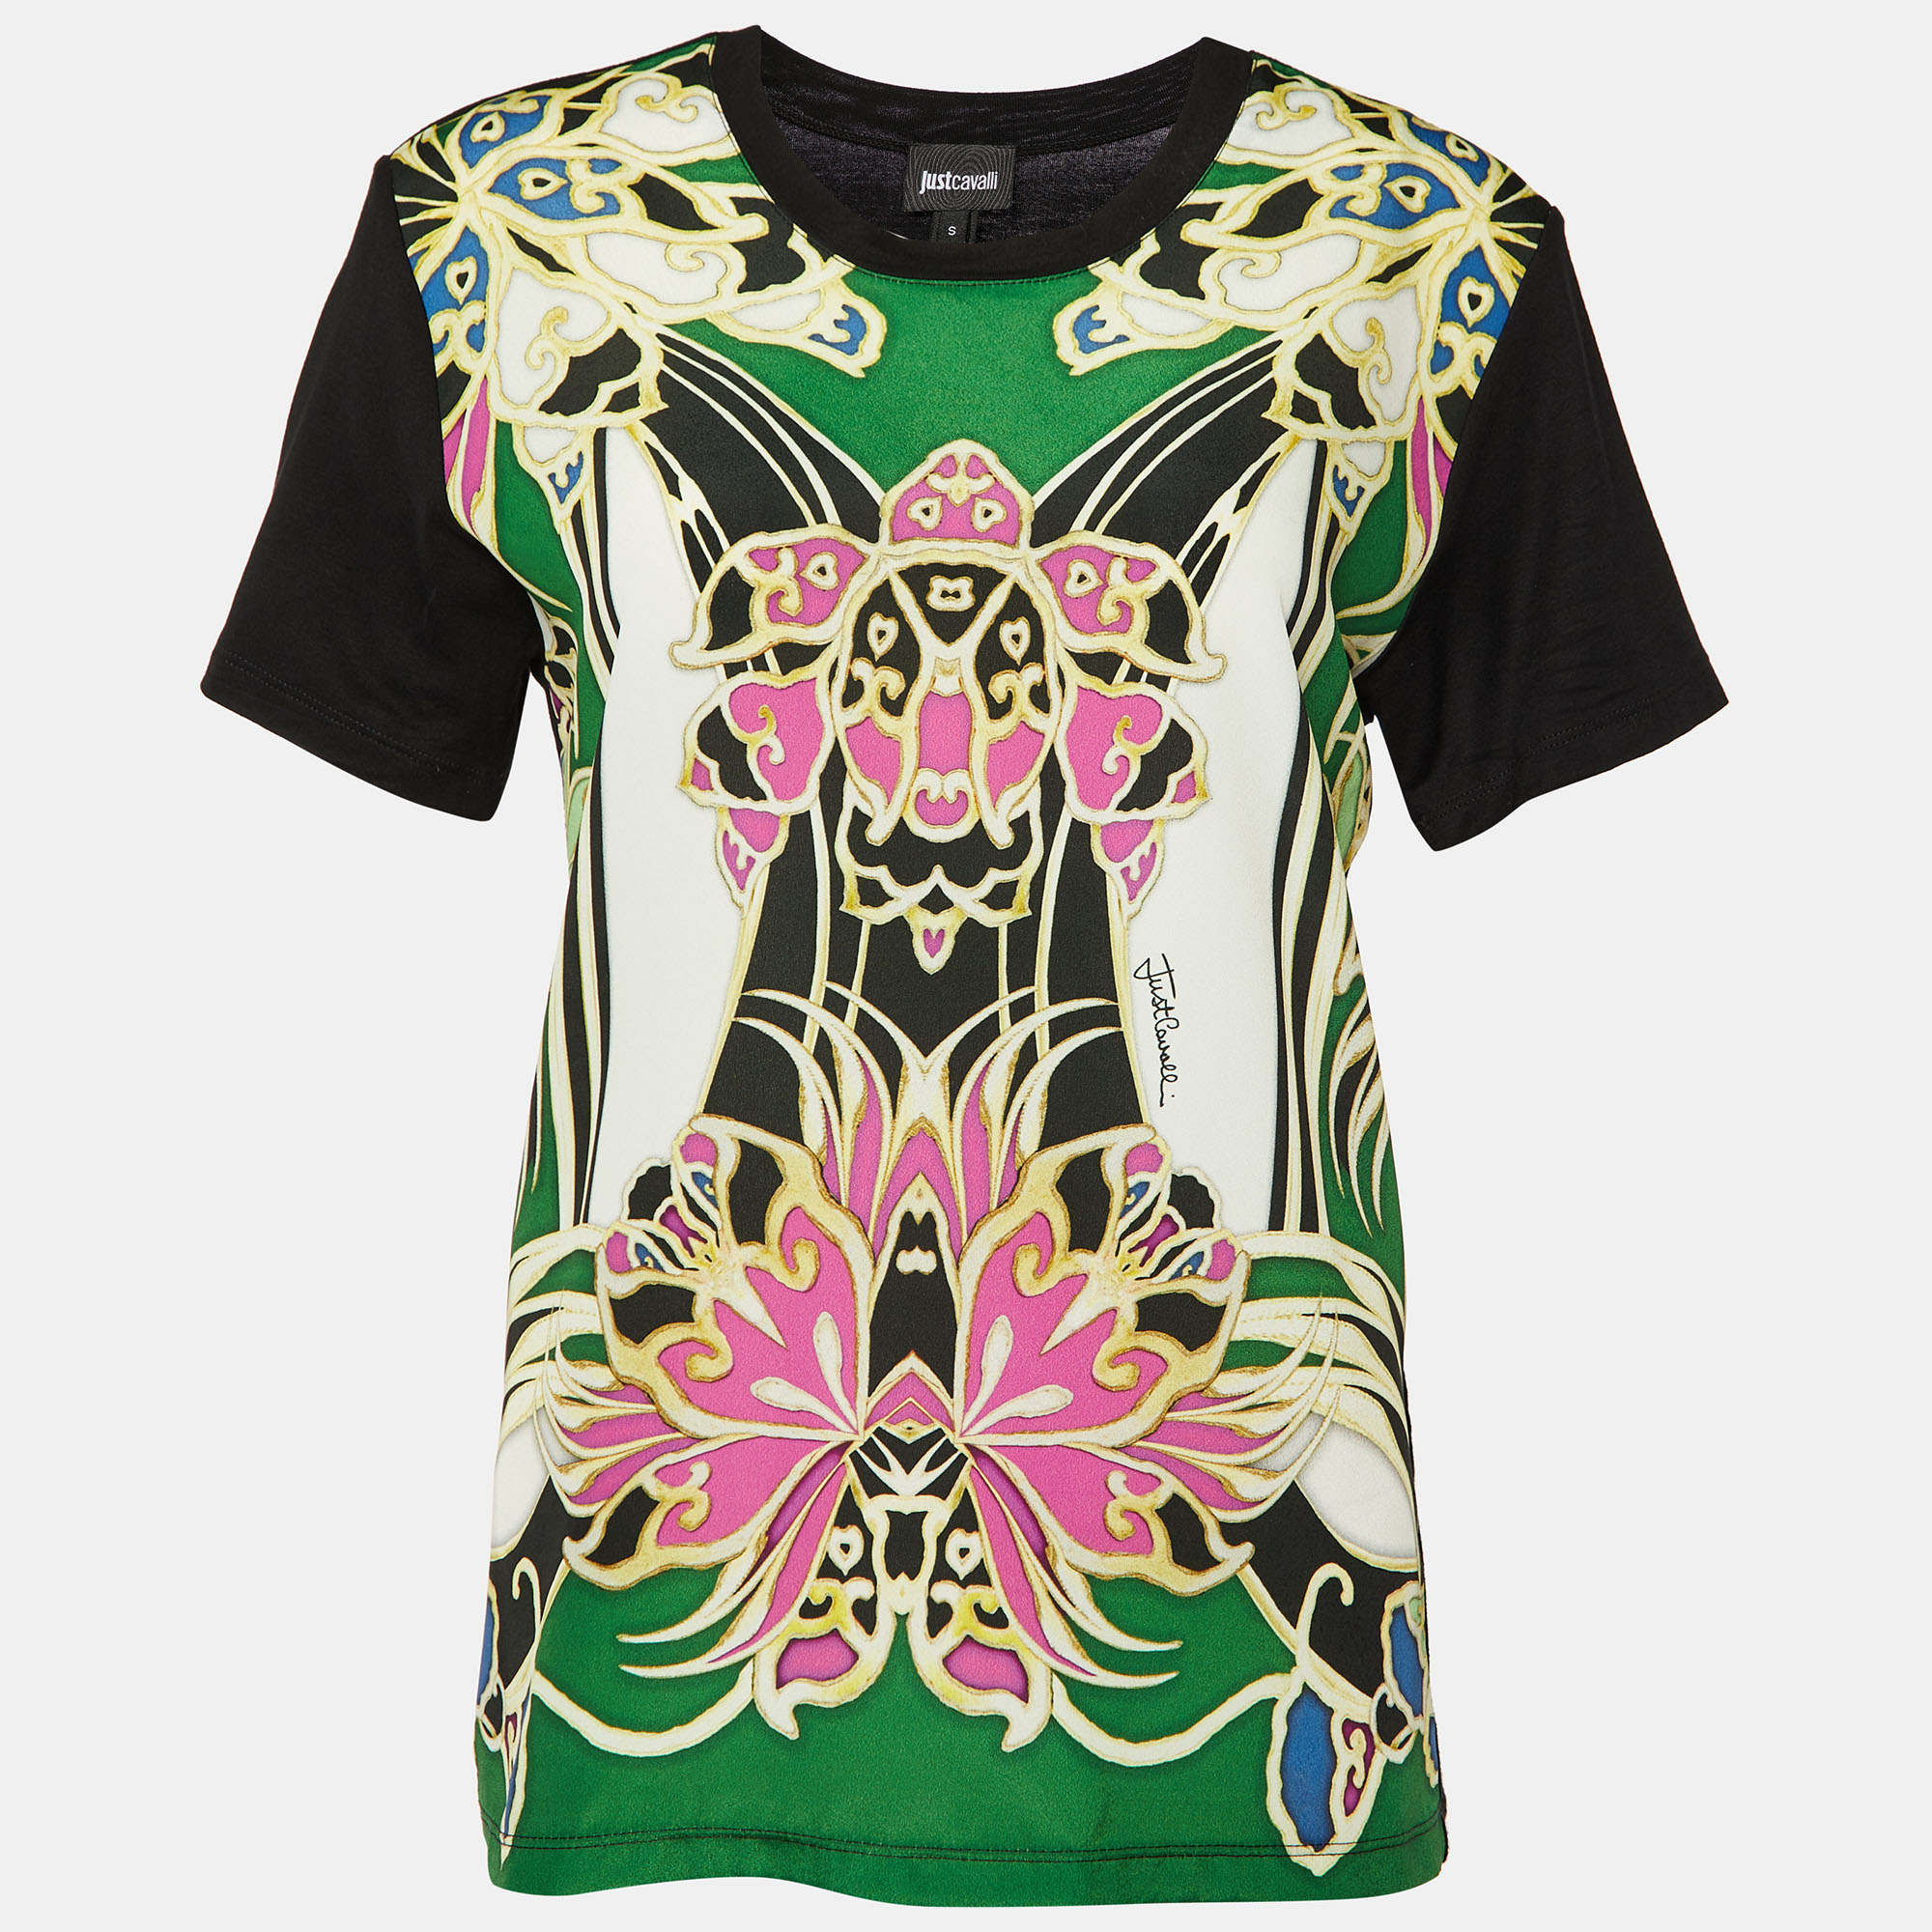 Roberto Cavalli Multicolor Printed Polyester & Cotton Knit T-Shirt S